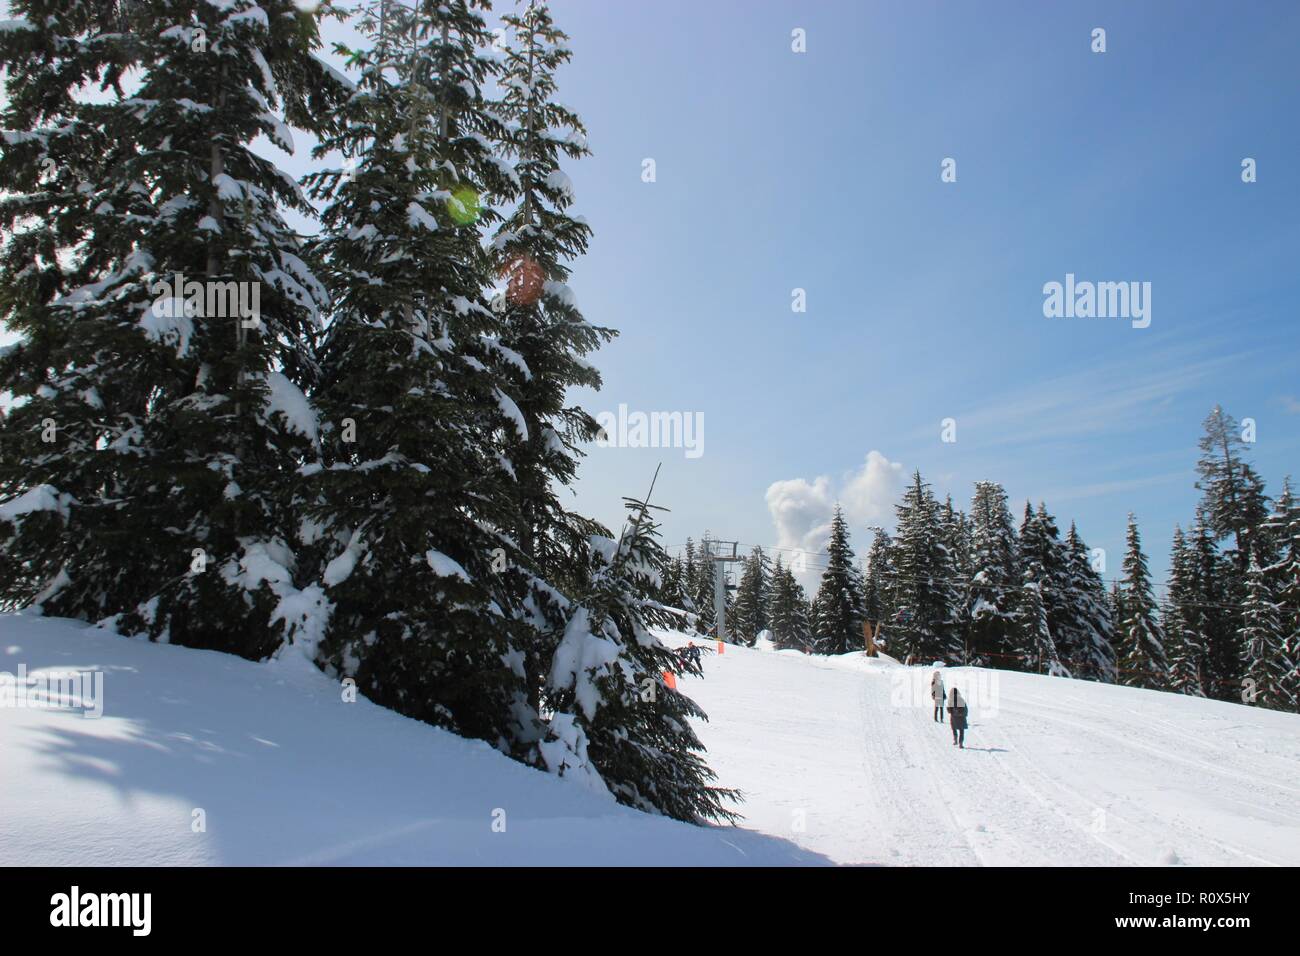 Christmas trees (Evergreen trees) Covered with Snow, Grouse Mountain, Vancouver, Canada Stock Photo